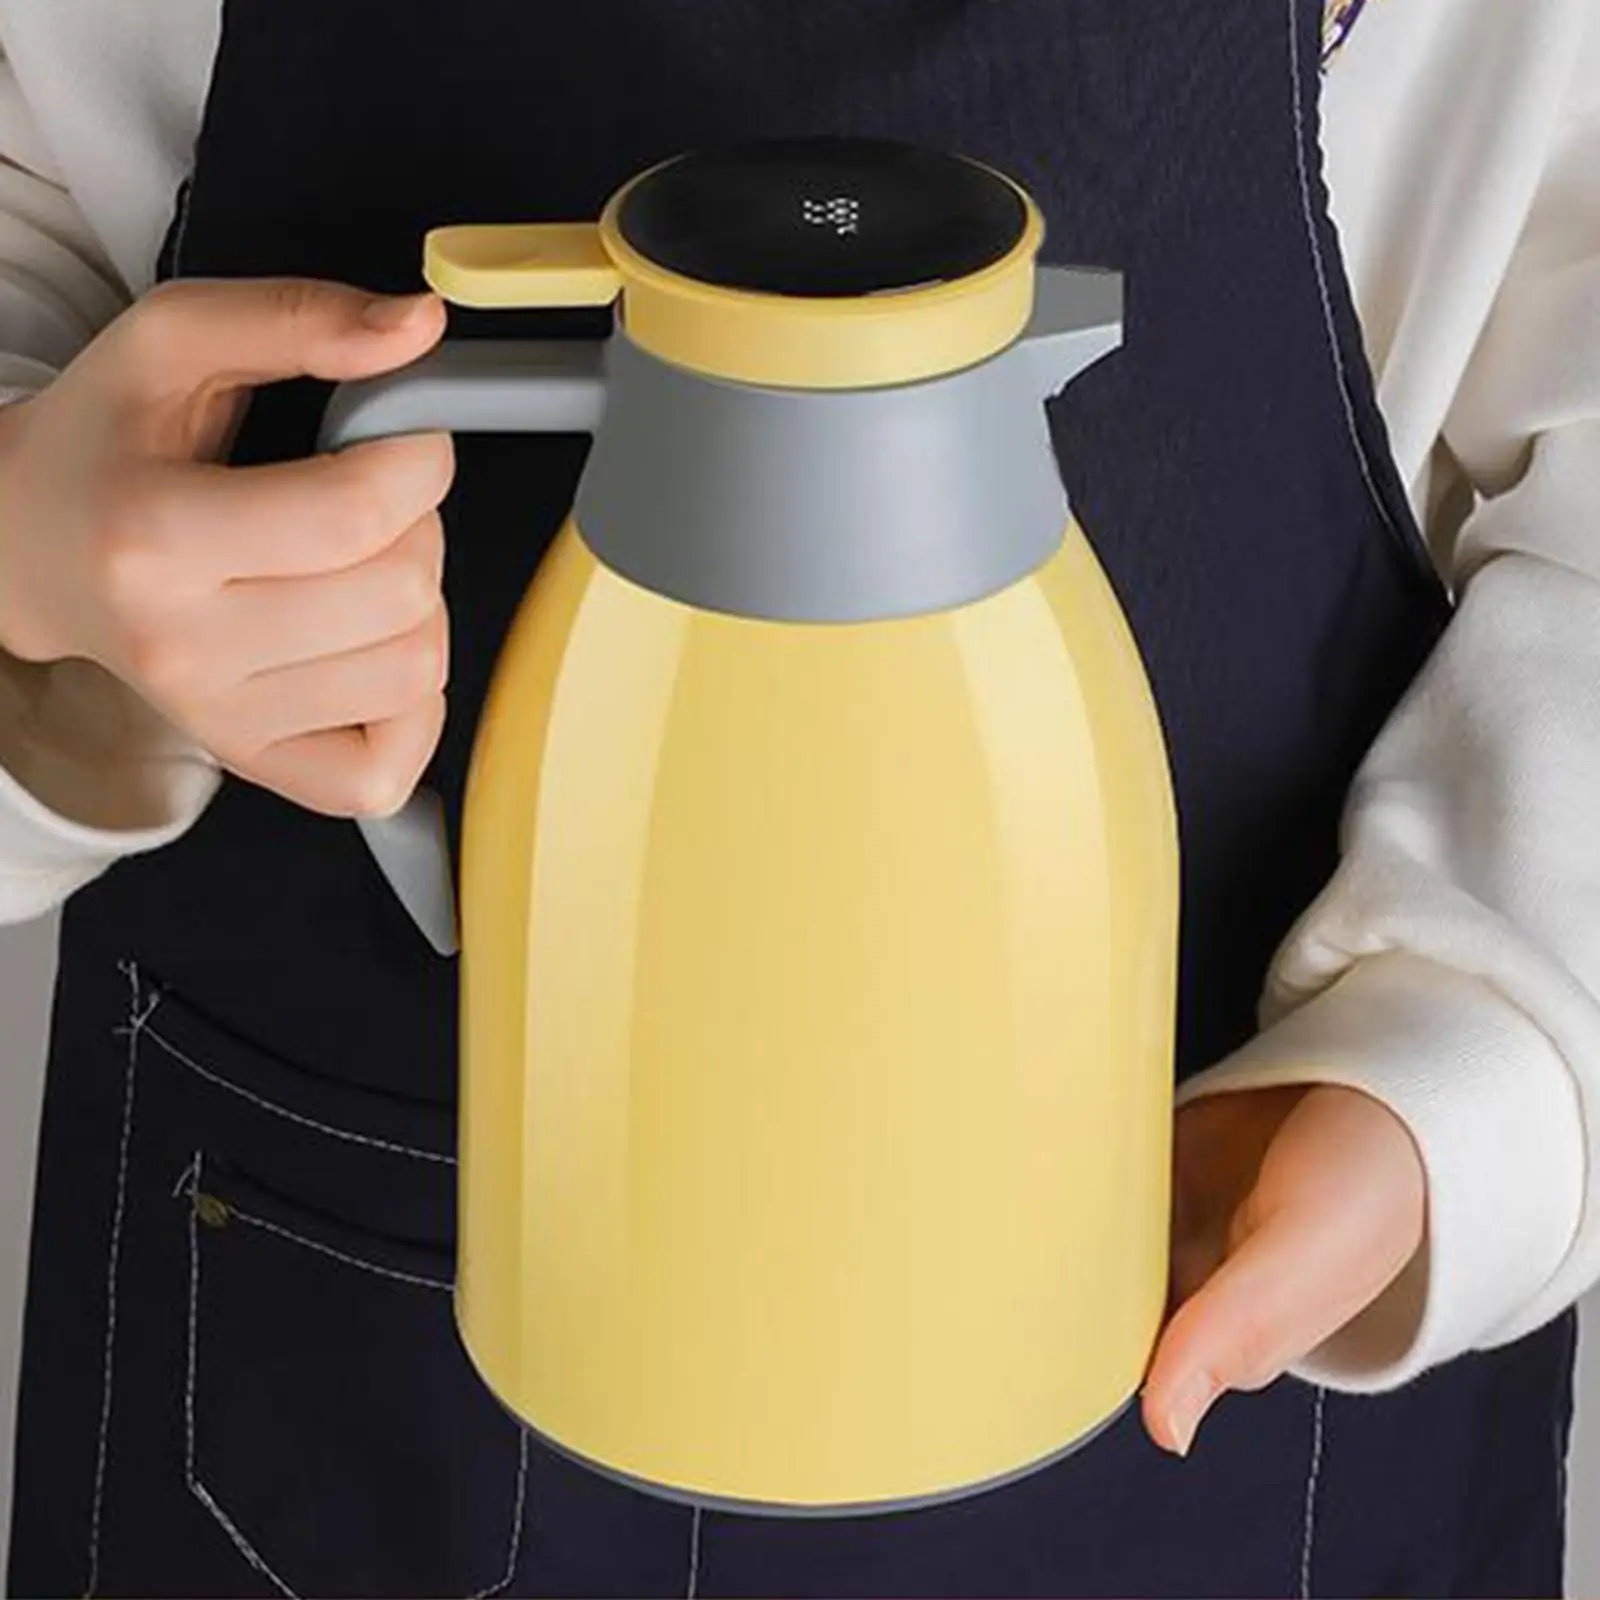 https://ae01.alicdn.com/kf/S3edc86c874144f079fd0e5ffe329f7e0y/Large-Capacity-Vacuum-Insulation-thermostat-Thermal-Coffee-Carafe-for-Indoor-Household.jpg